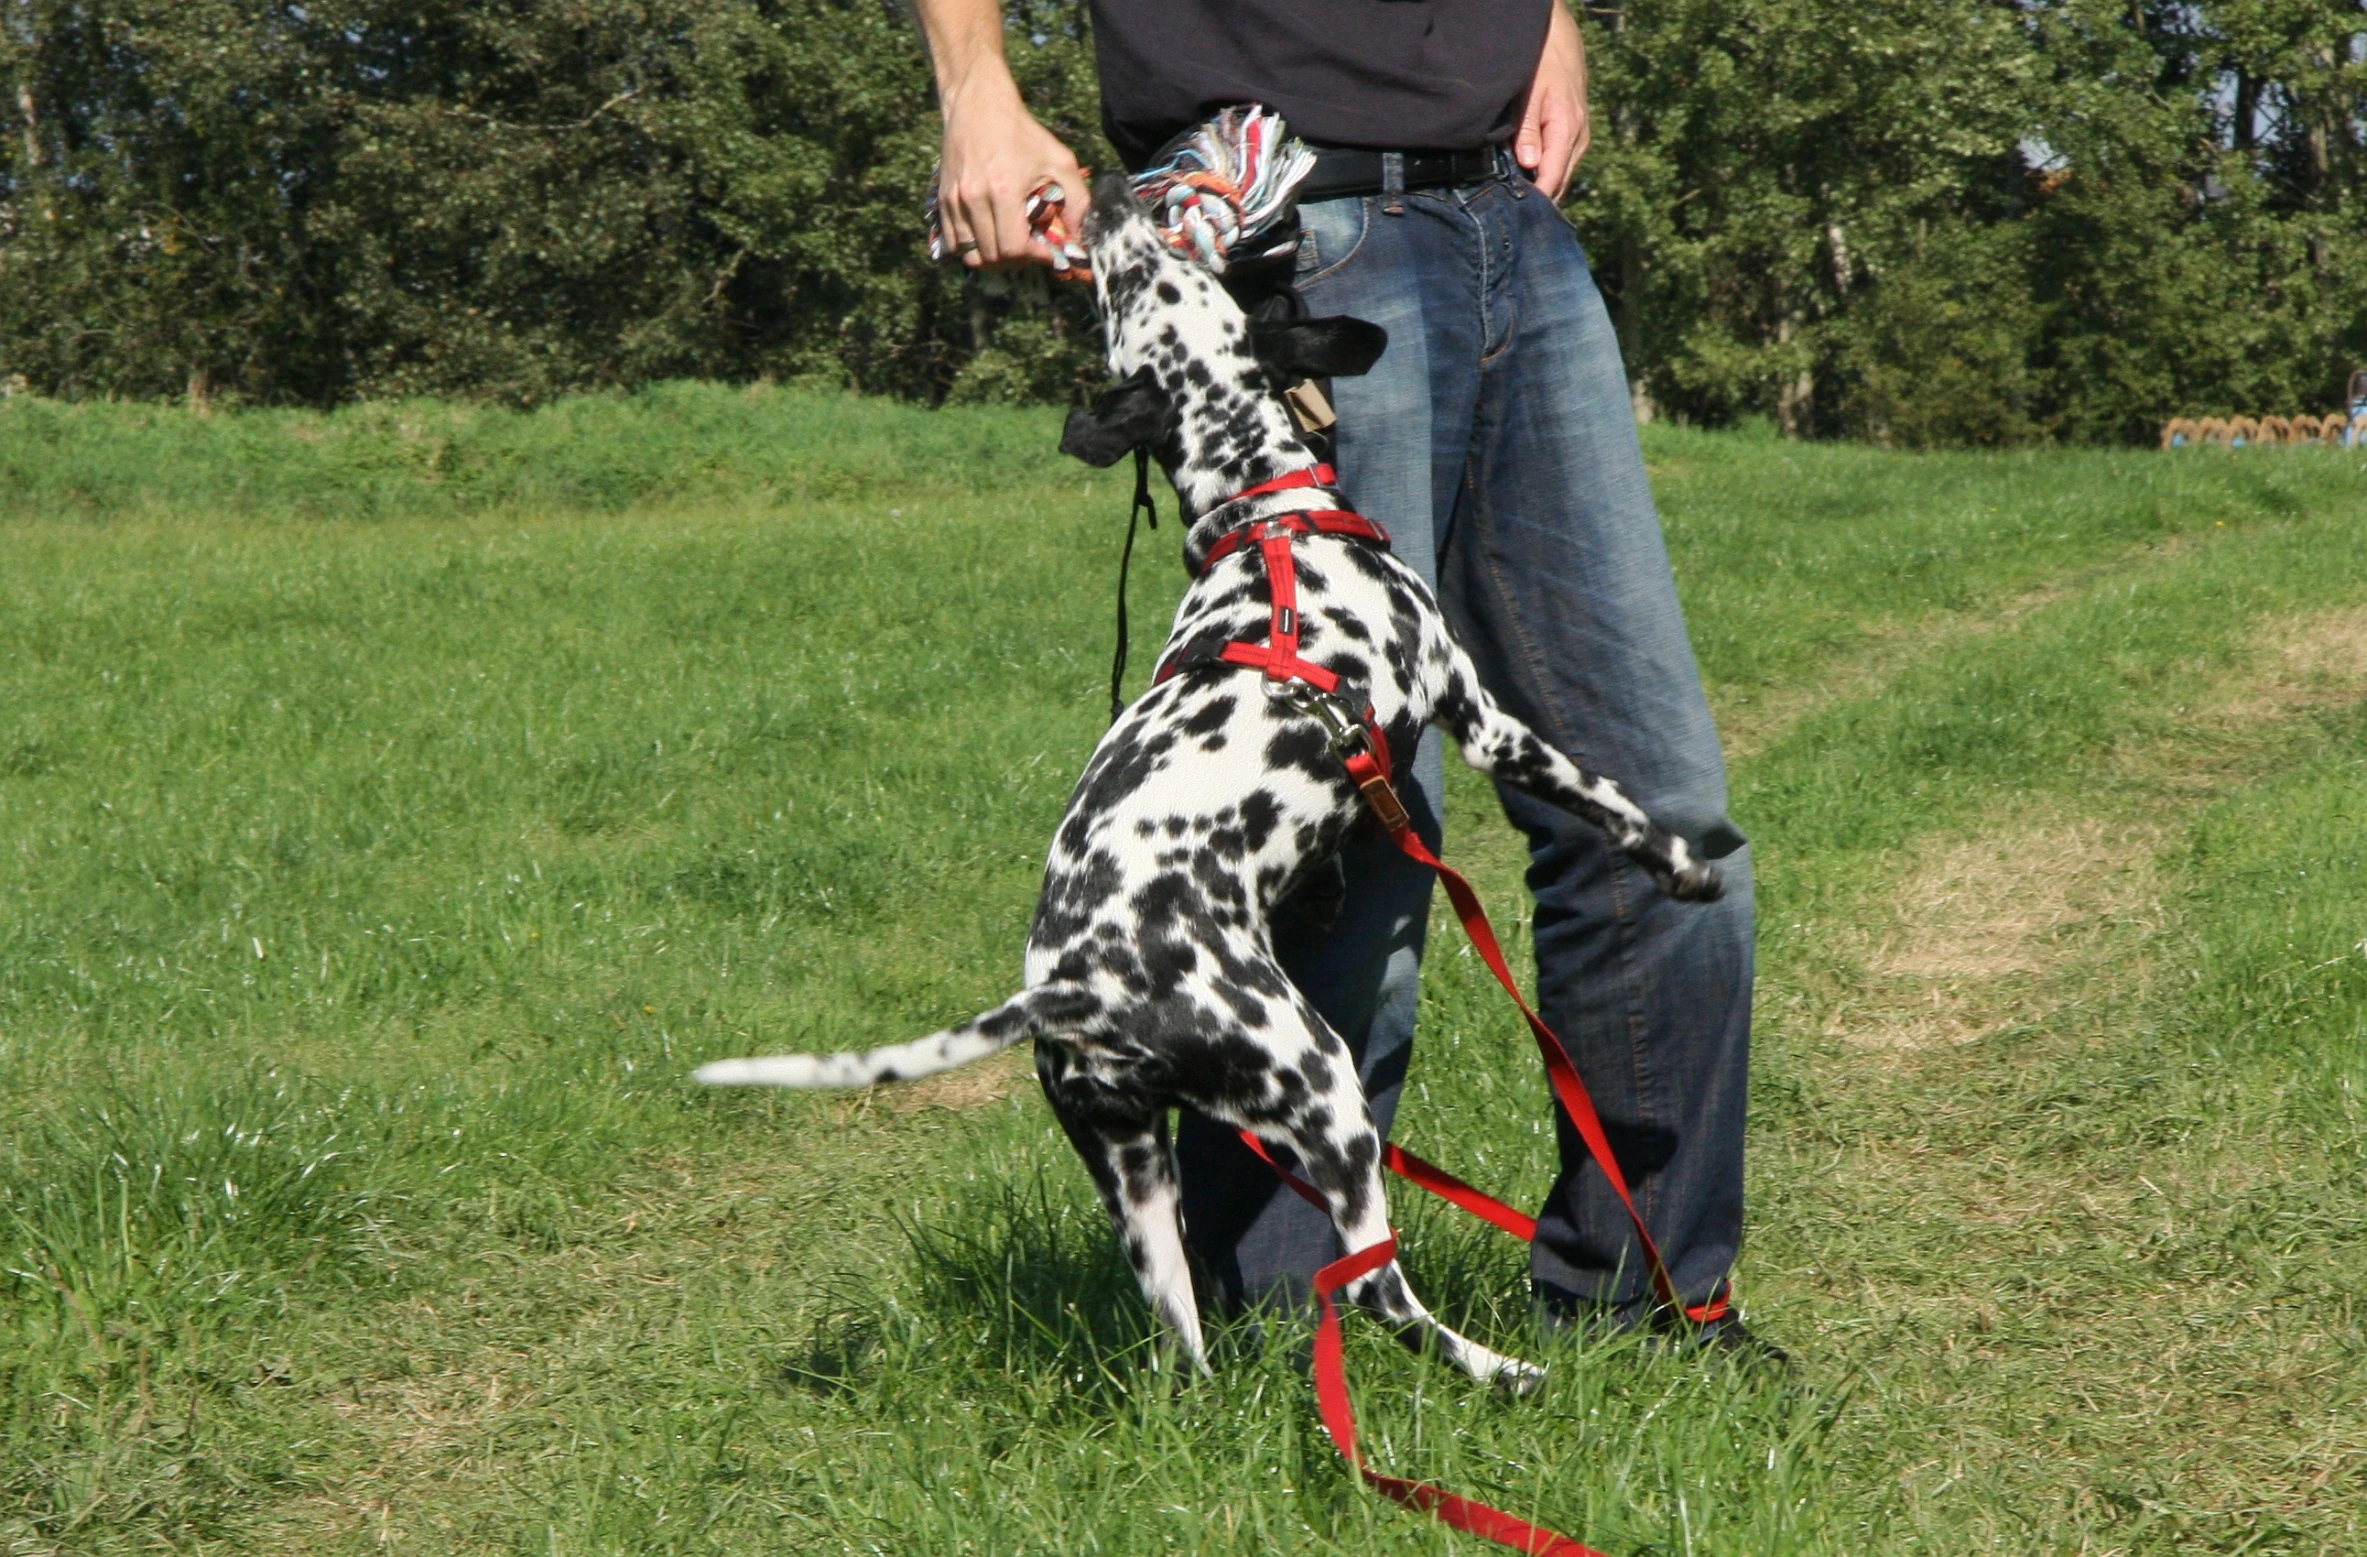 a dog with a leash on and another dalmatian being walked by a person in the grass